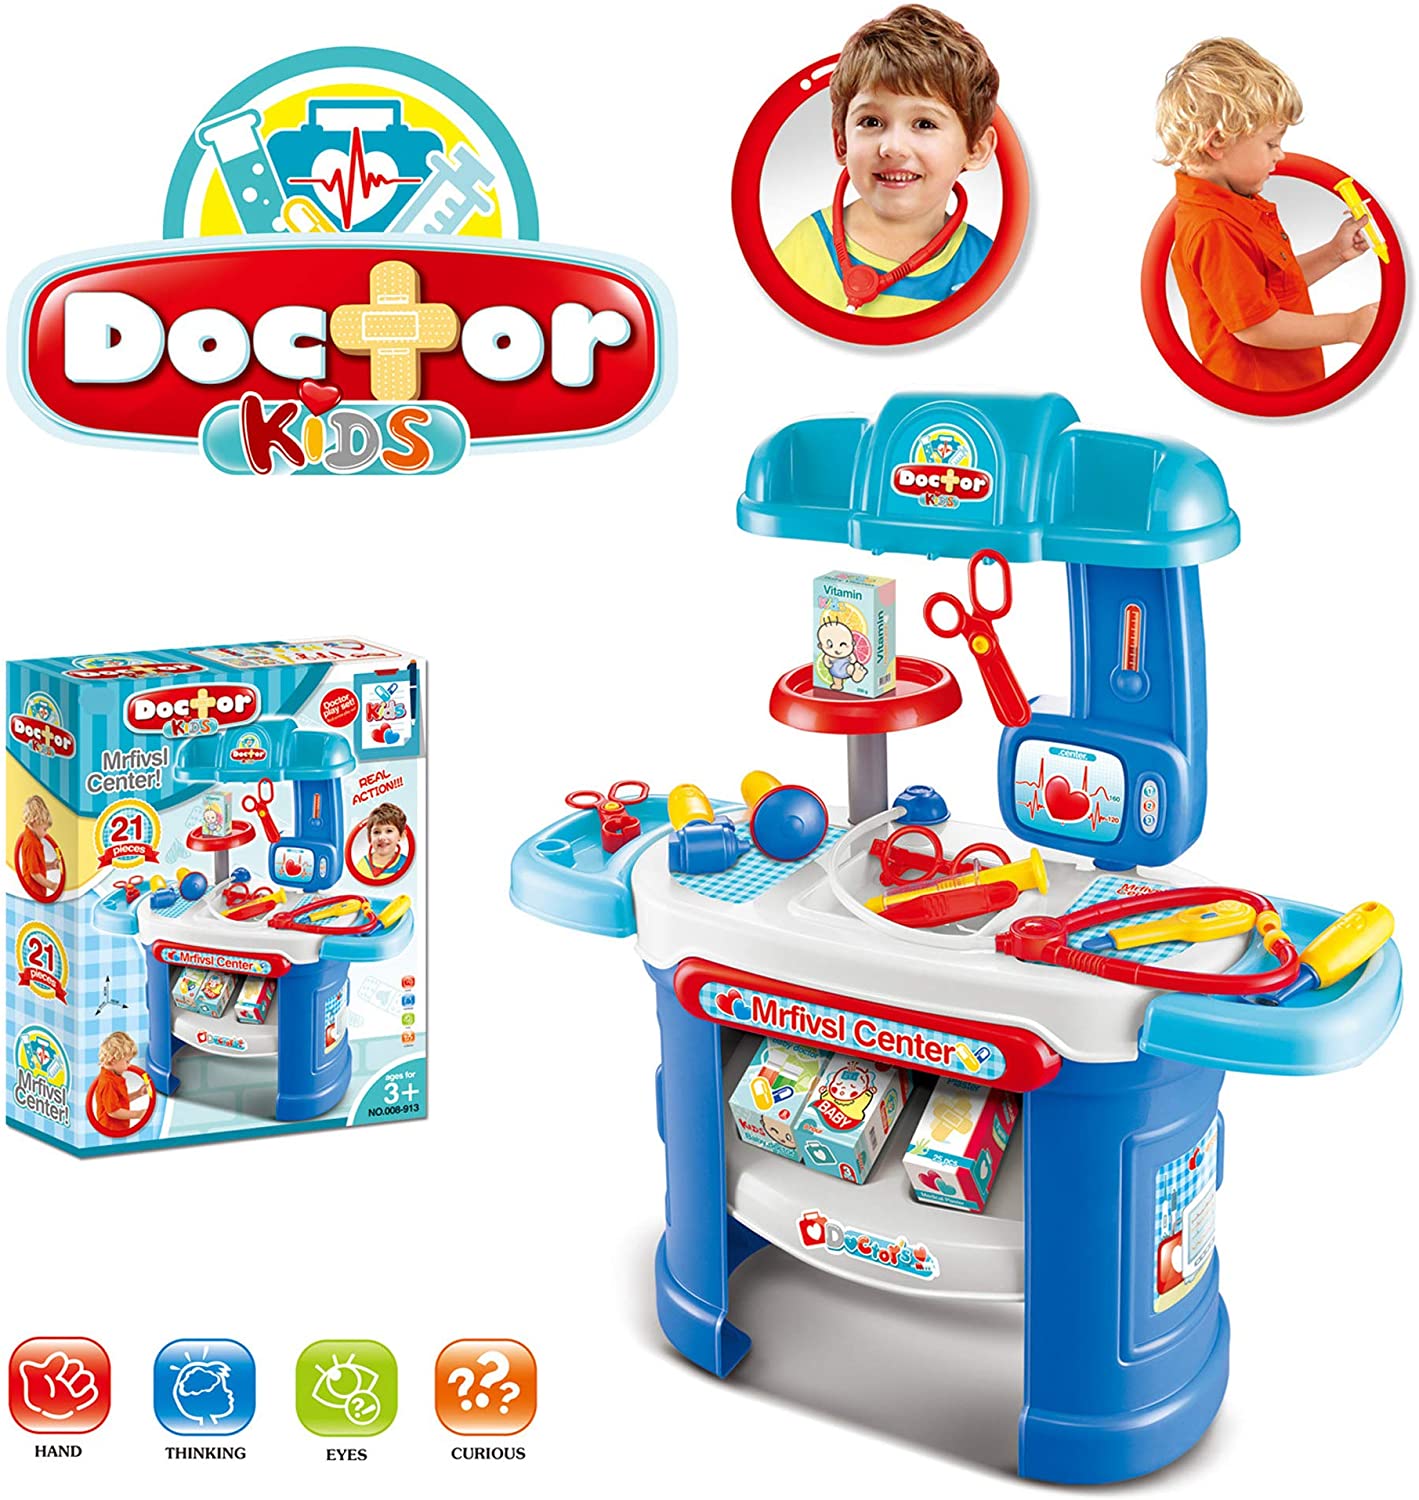 Pretend Medical Toy Doctor Kit for Toddler Dentist Playset-15 Medical Equipment with a Sturdy Medical Table